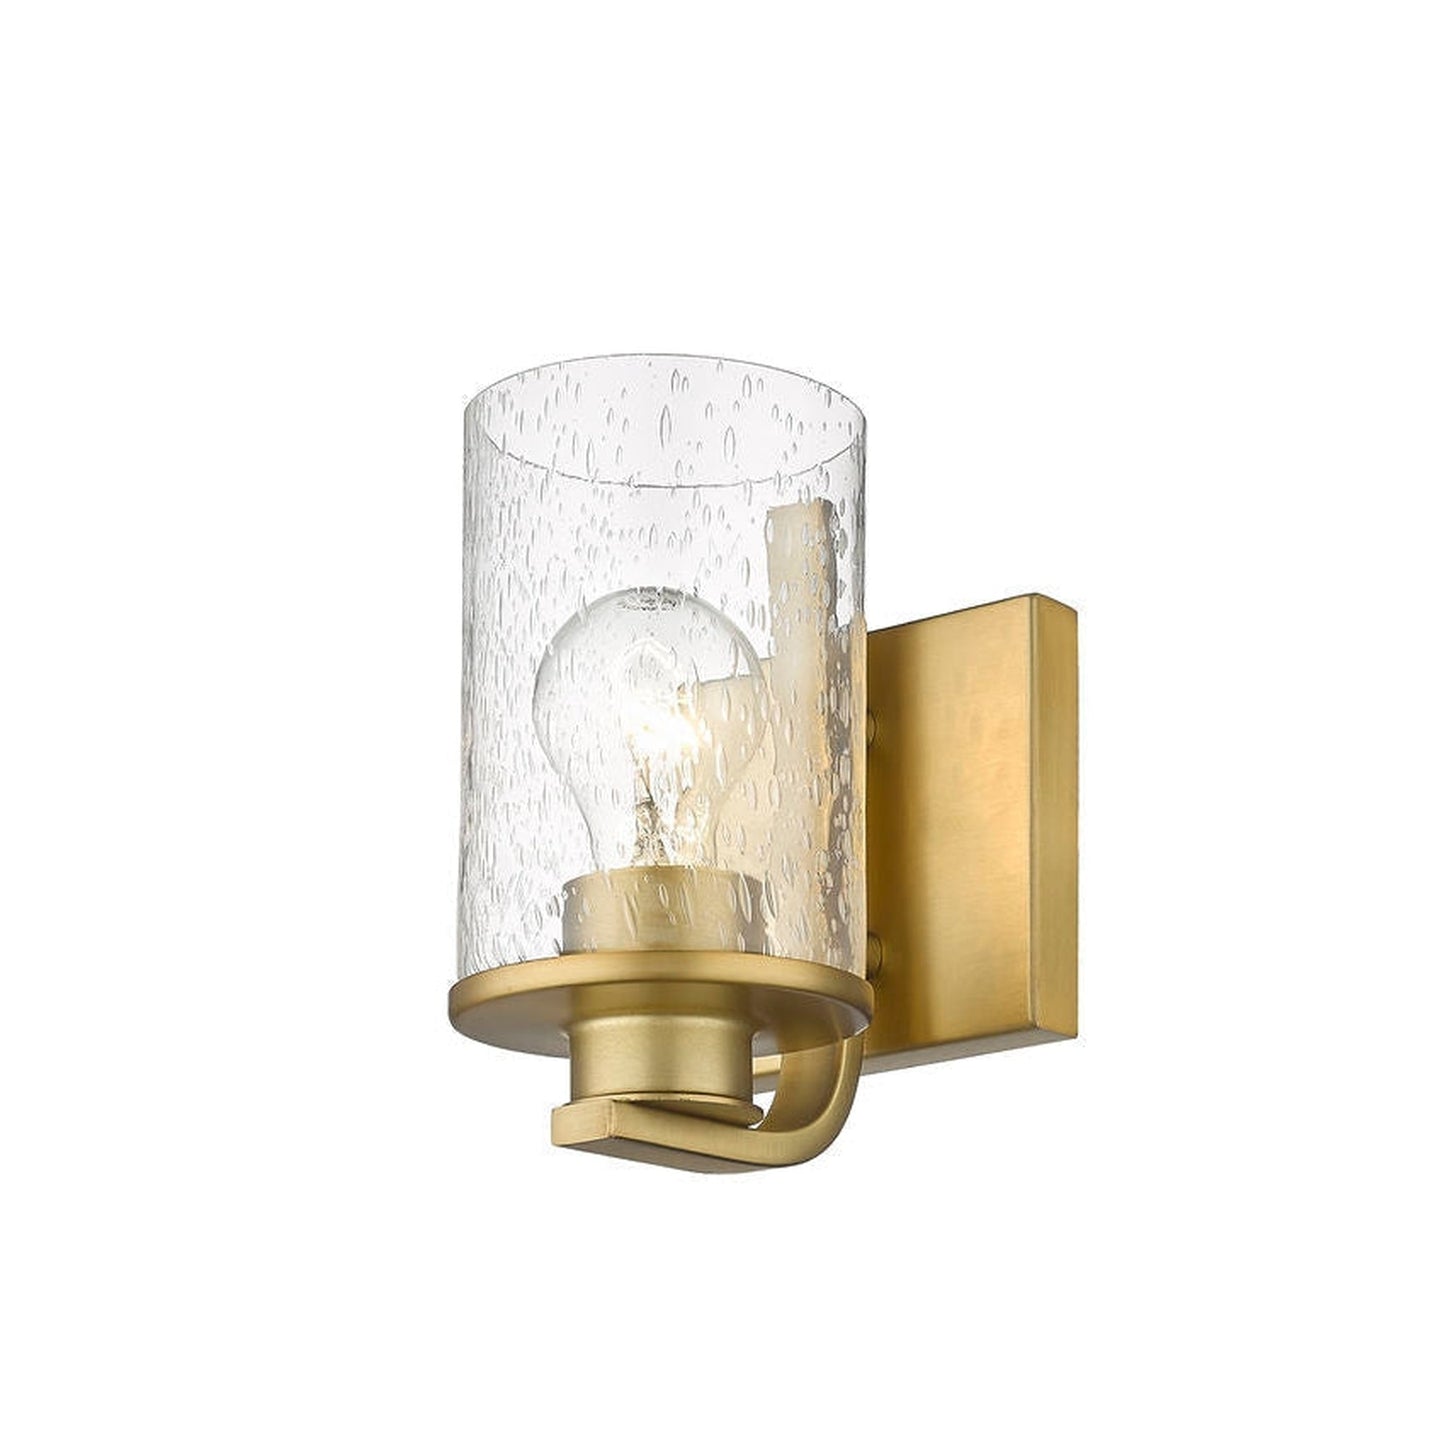 Z-Lite Beckett 5" 1-Light Olde Brass Wall Sconce With Clear Seedy Glass Shade